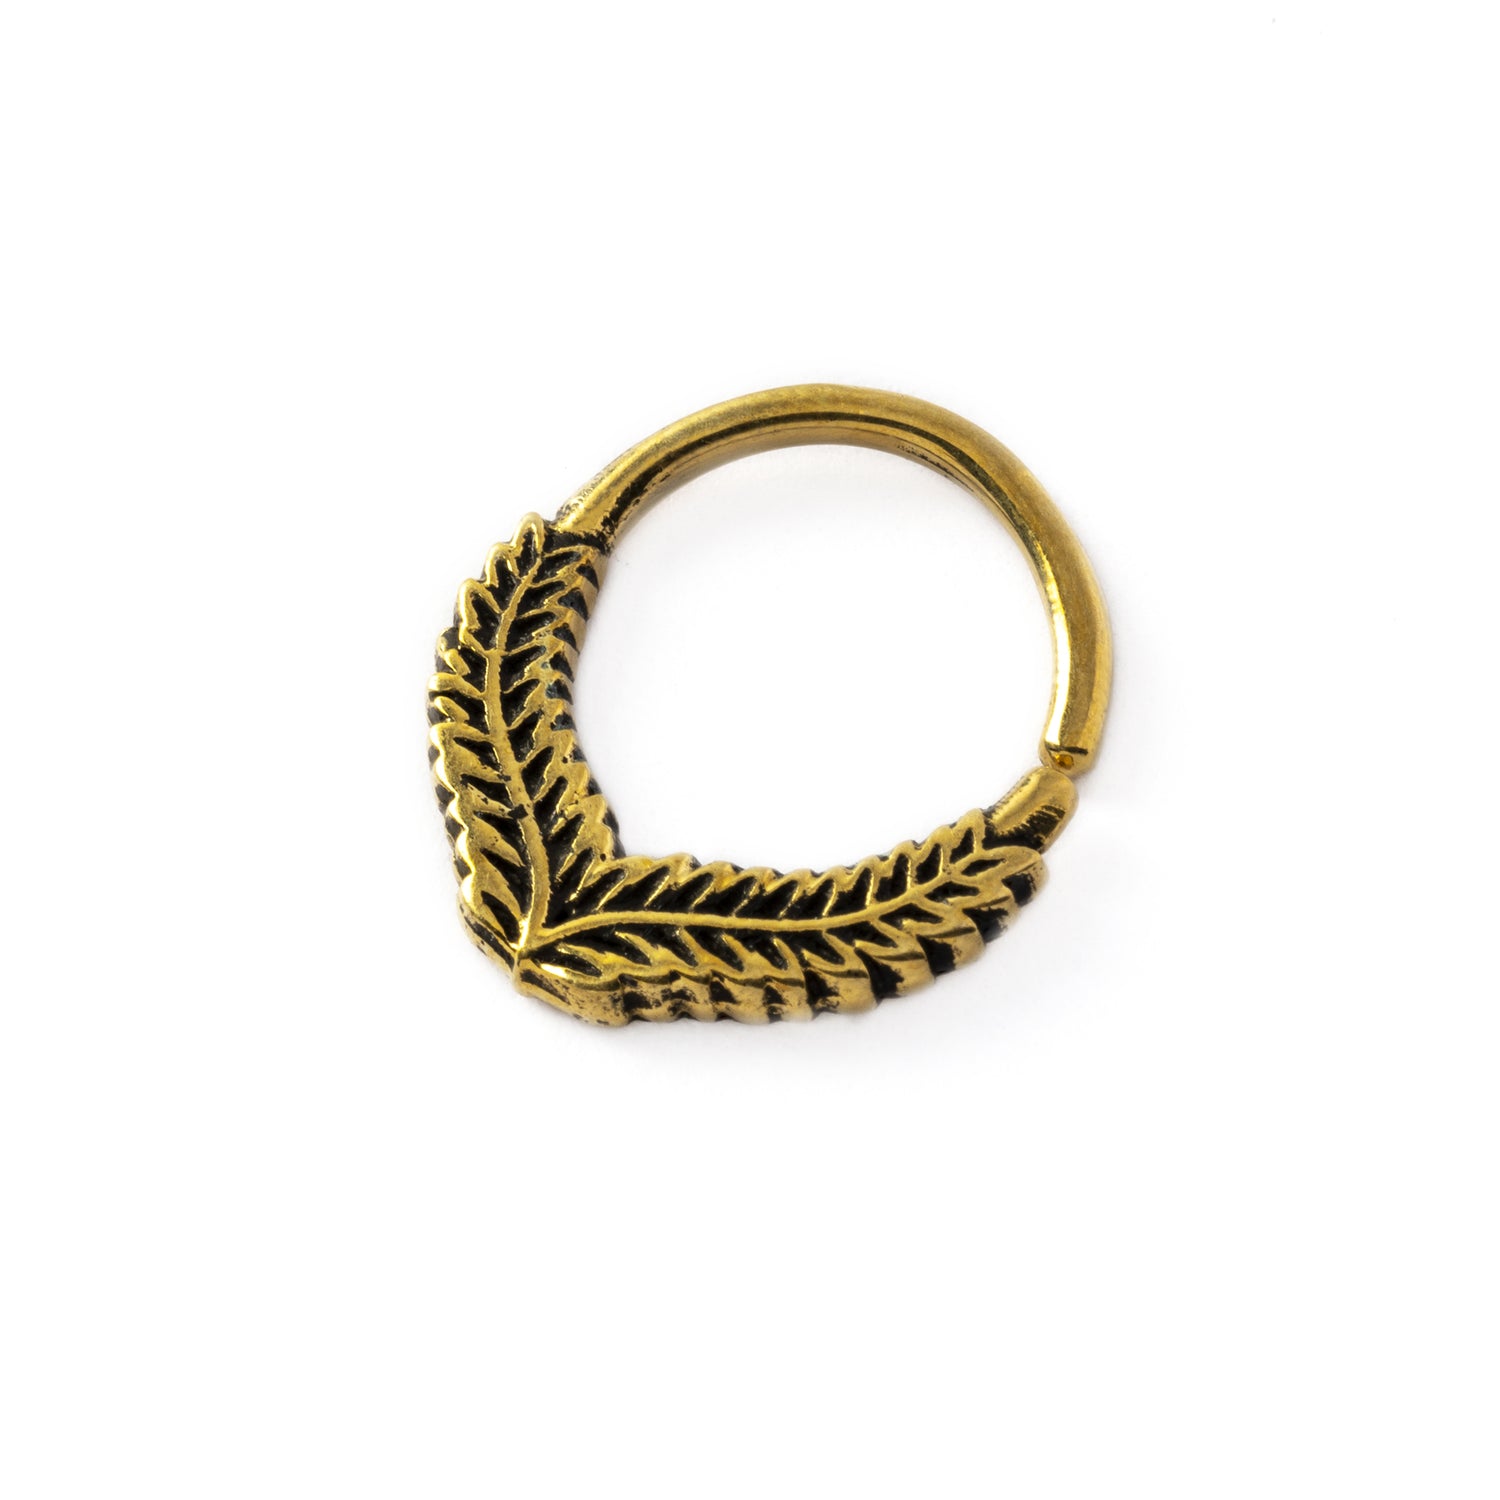 Fern Septum Ring in oxidised golden brass rigjt side view